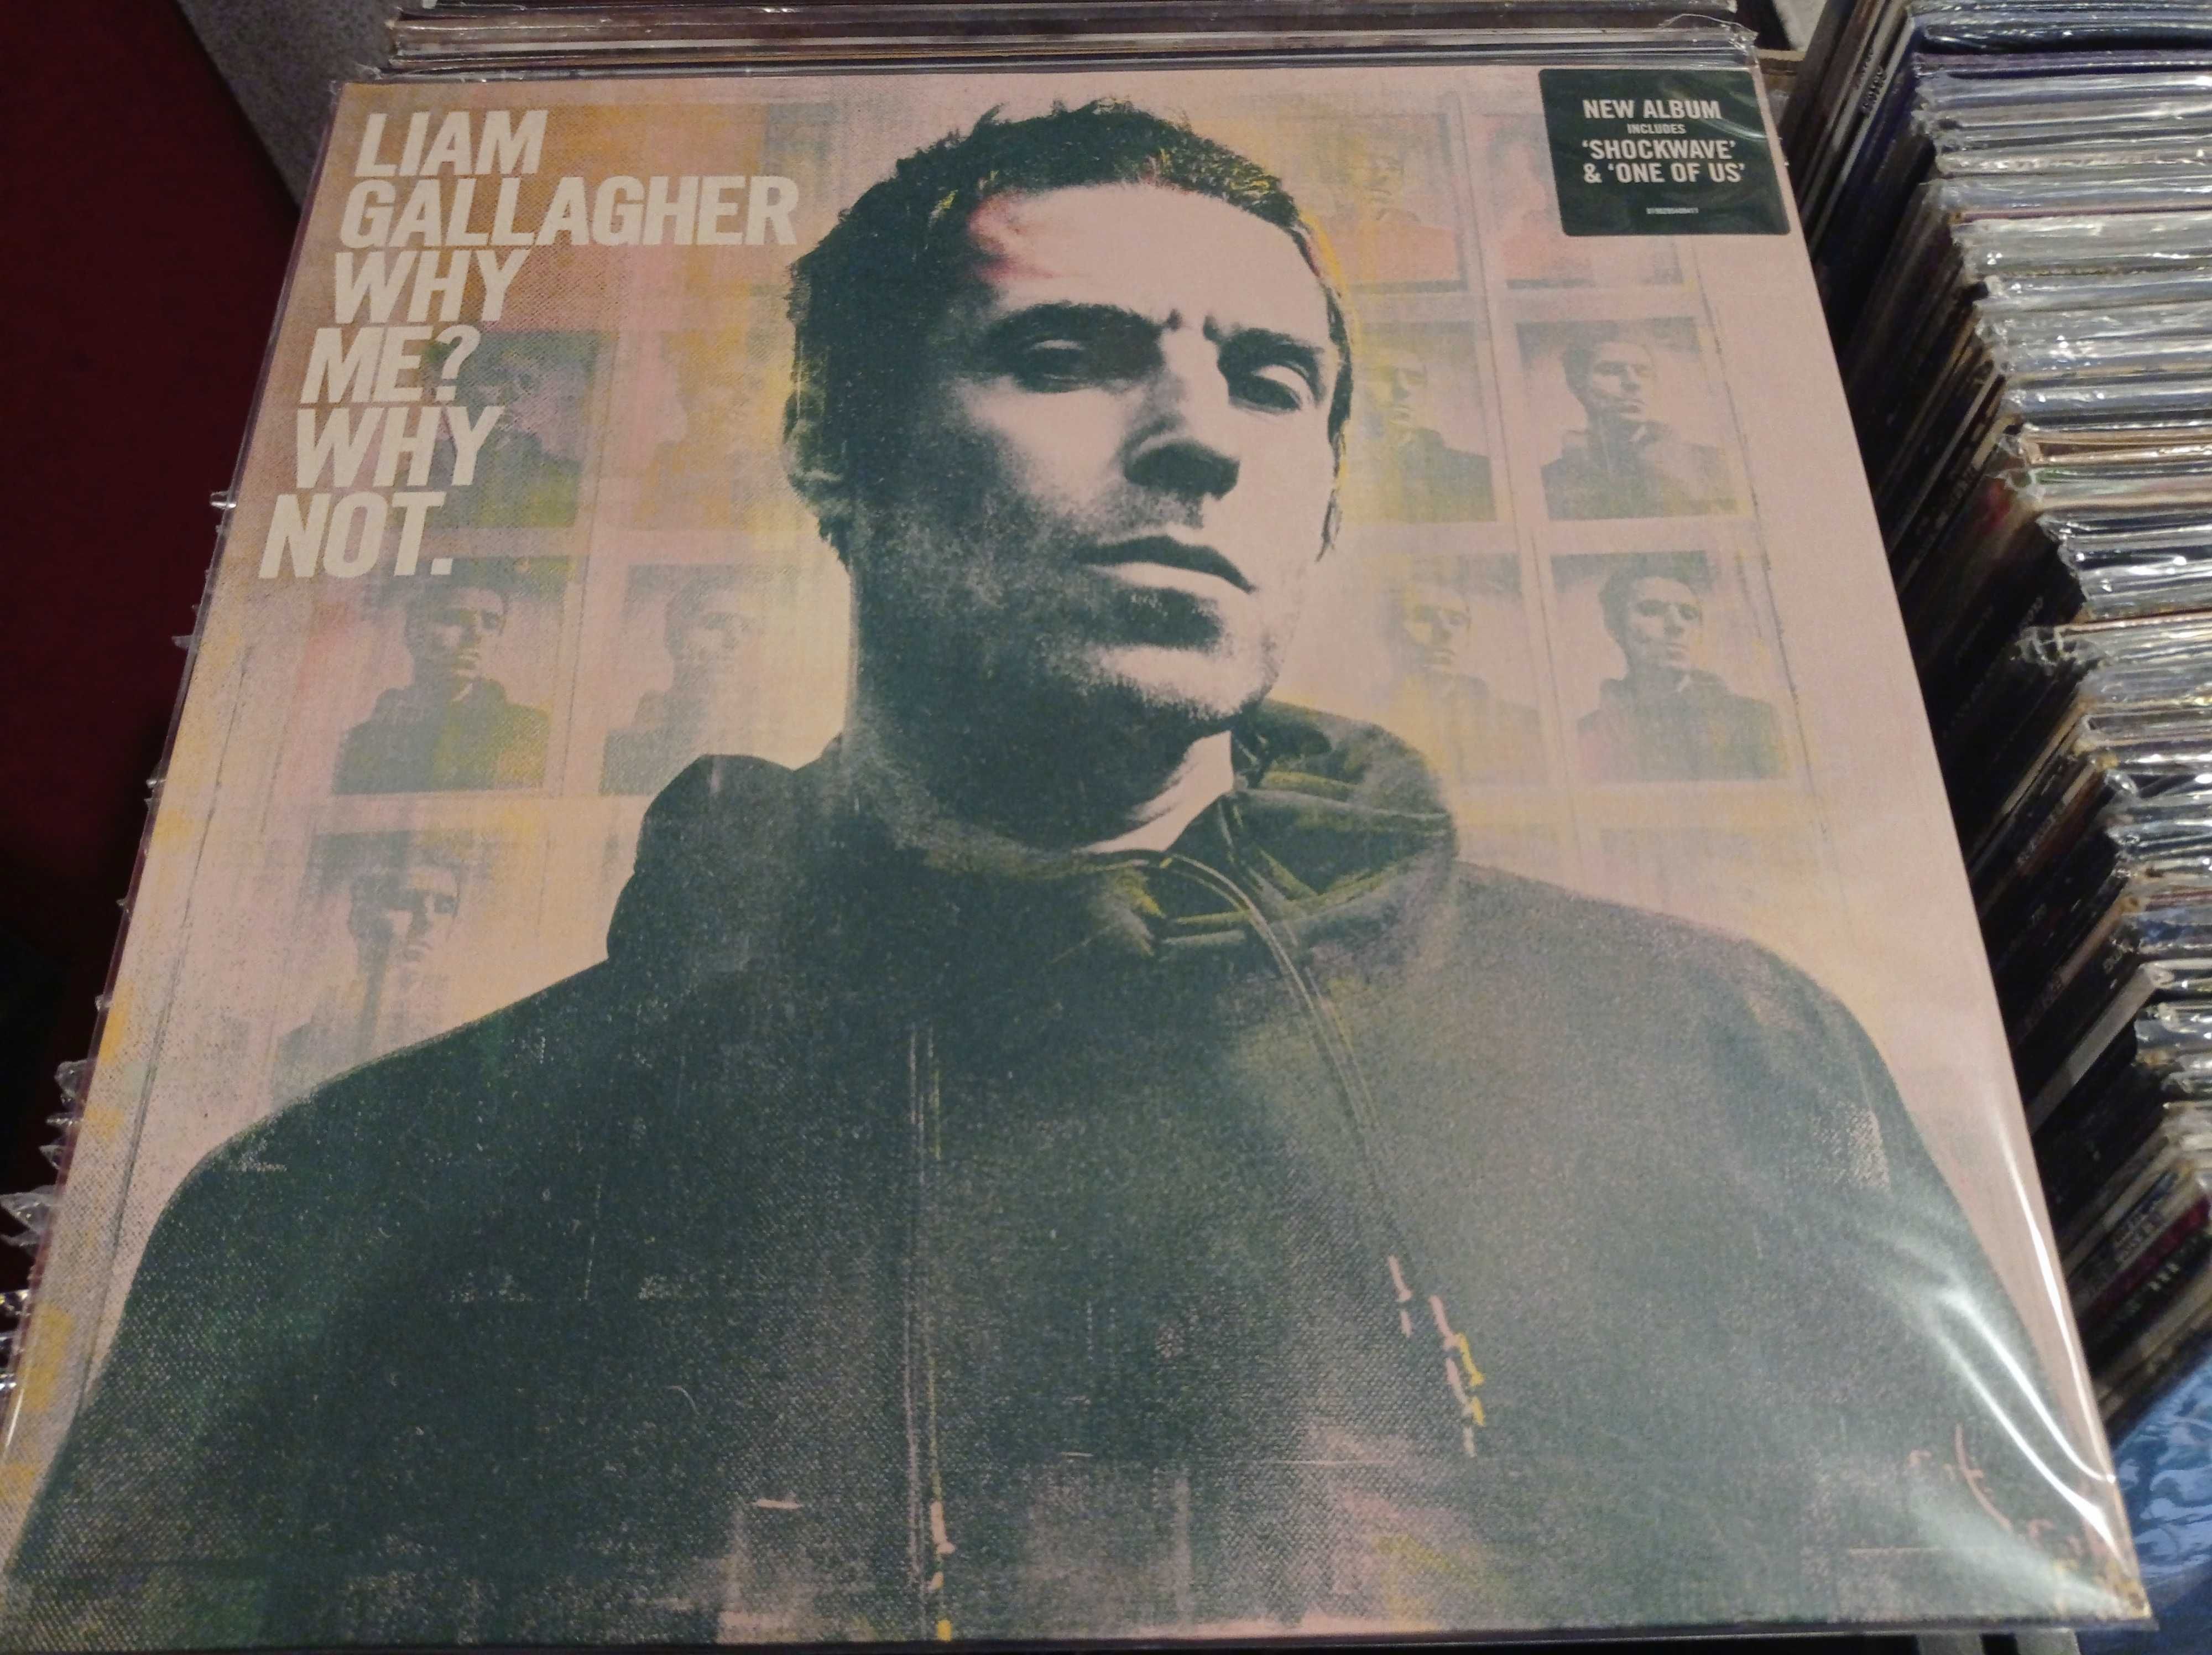 Liam Gallagher - Why me? Why nowy?